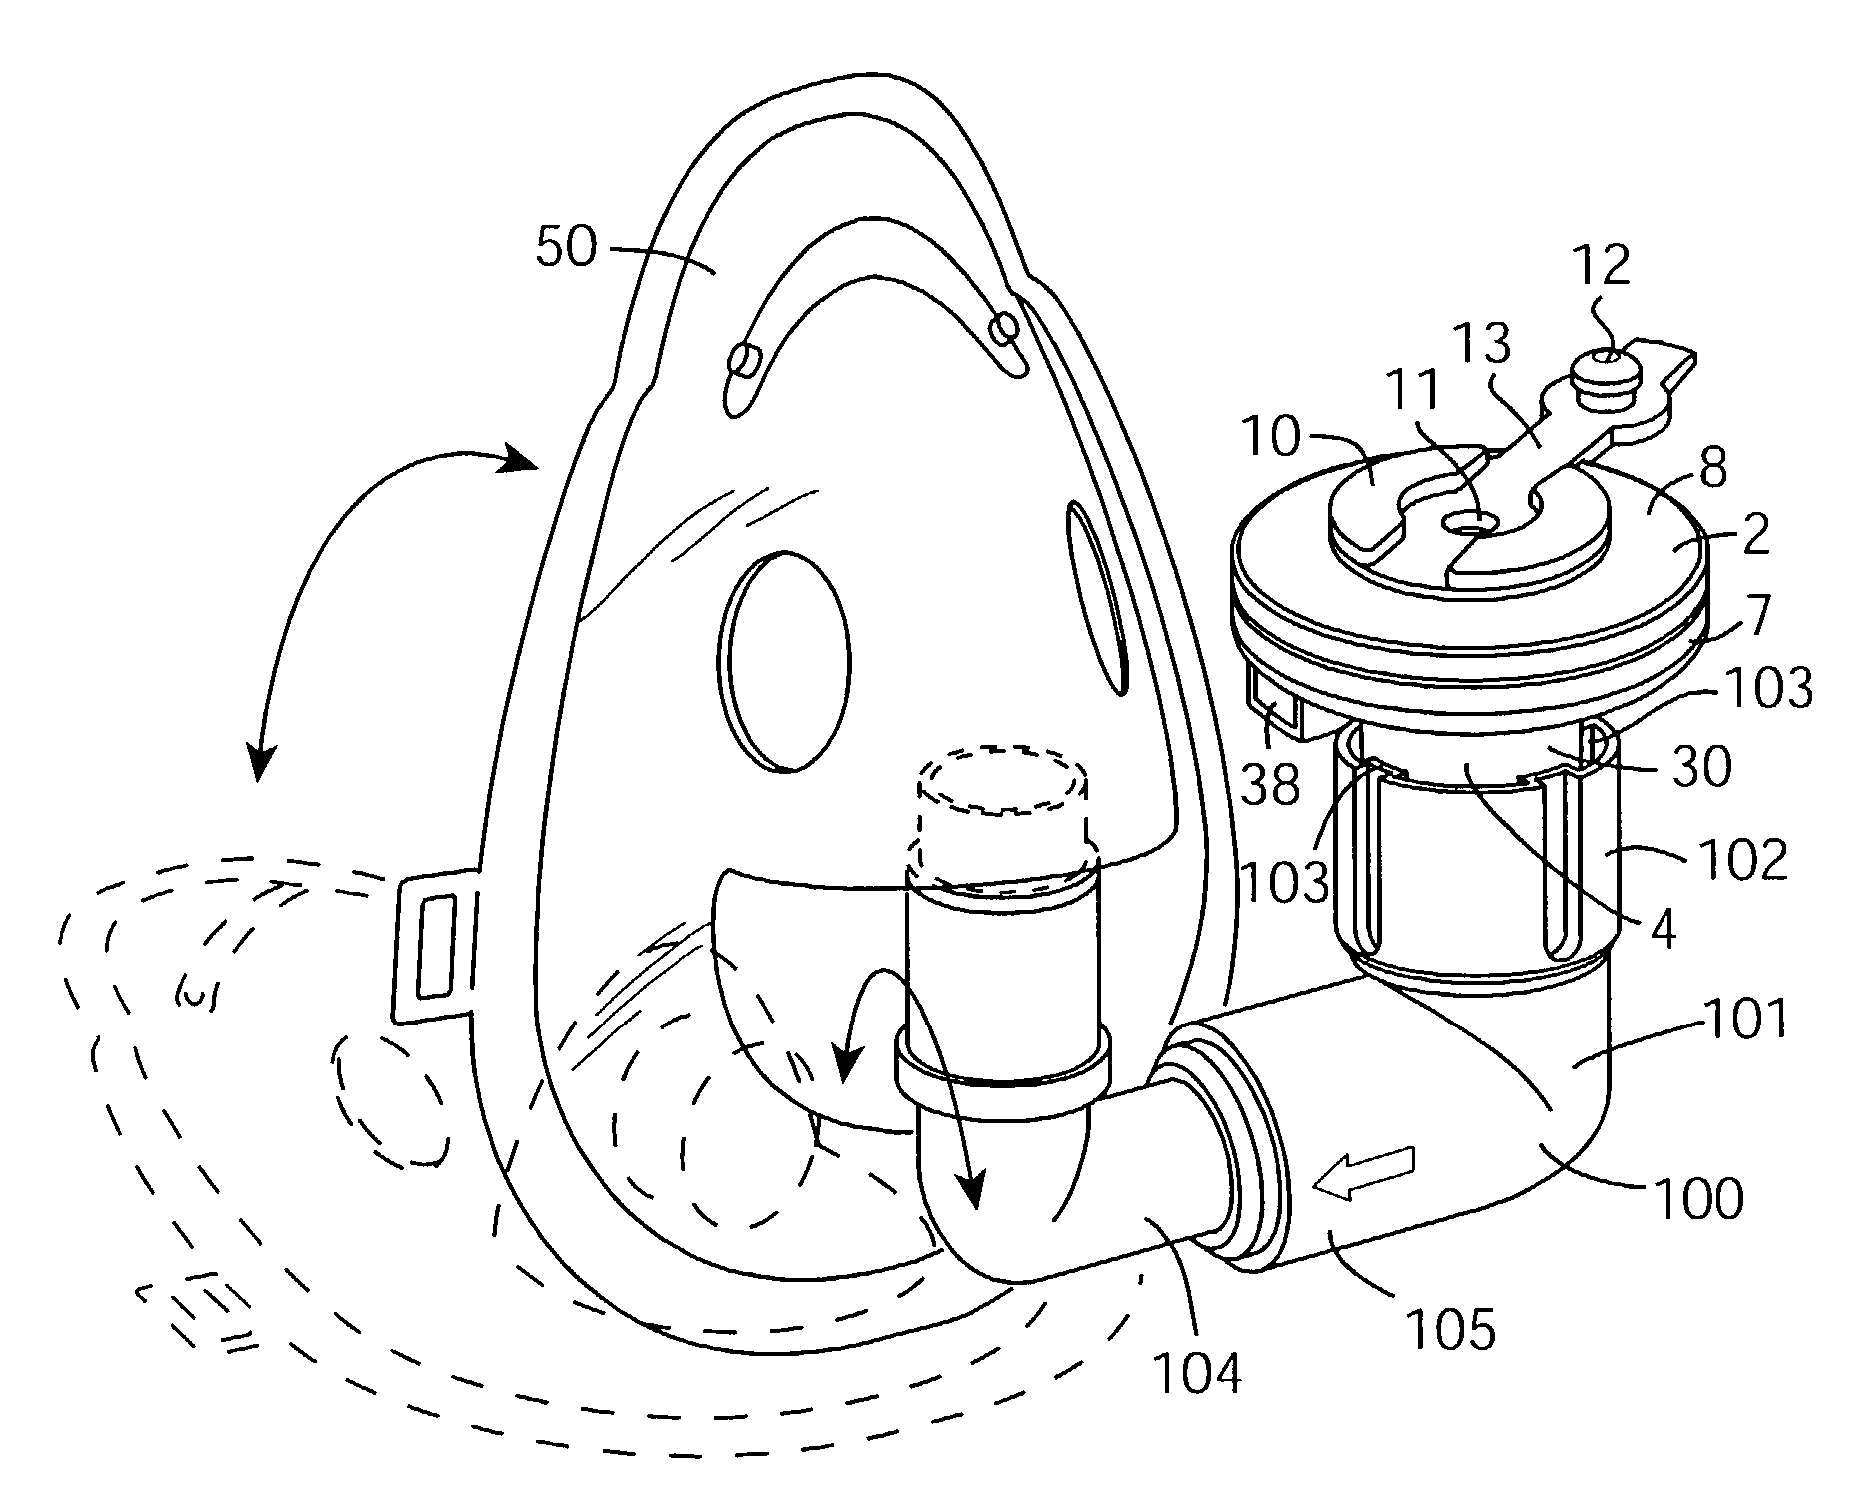 Apparatus and methods for delivery of medicament to a respiratory system